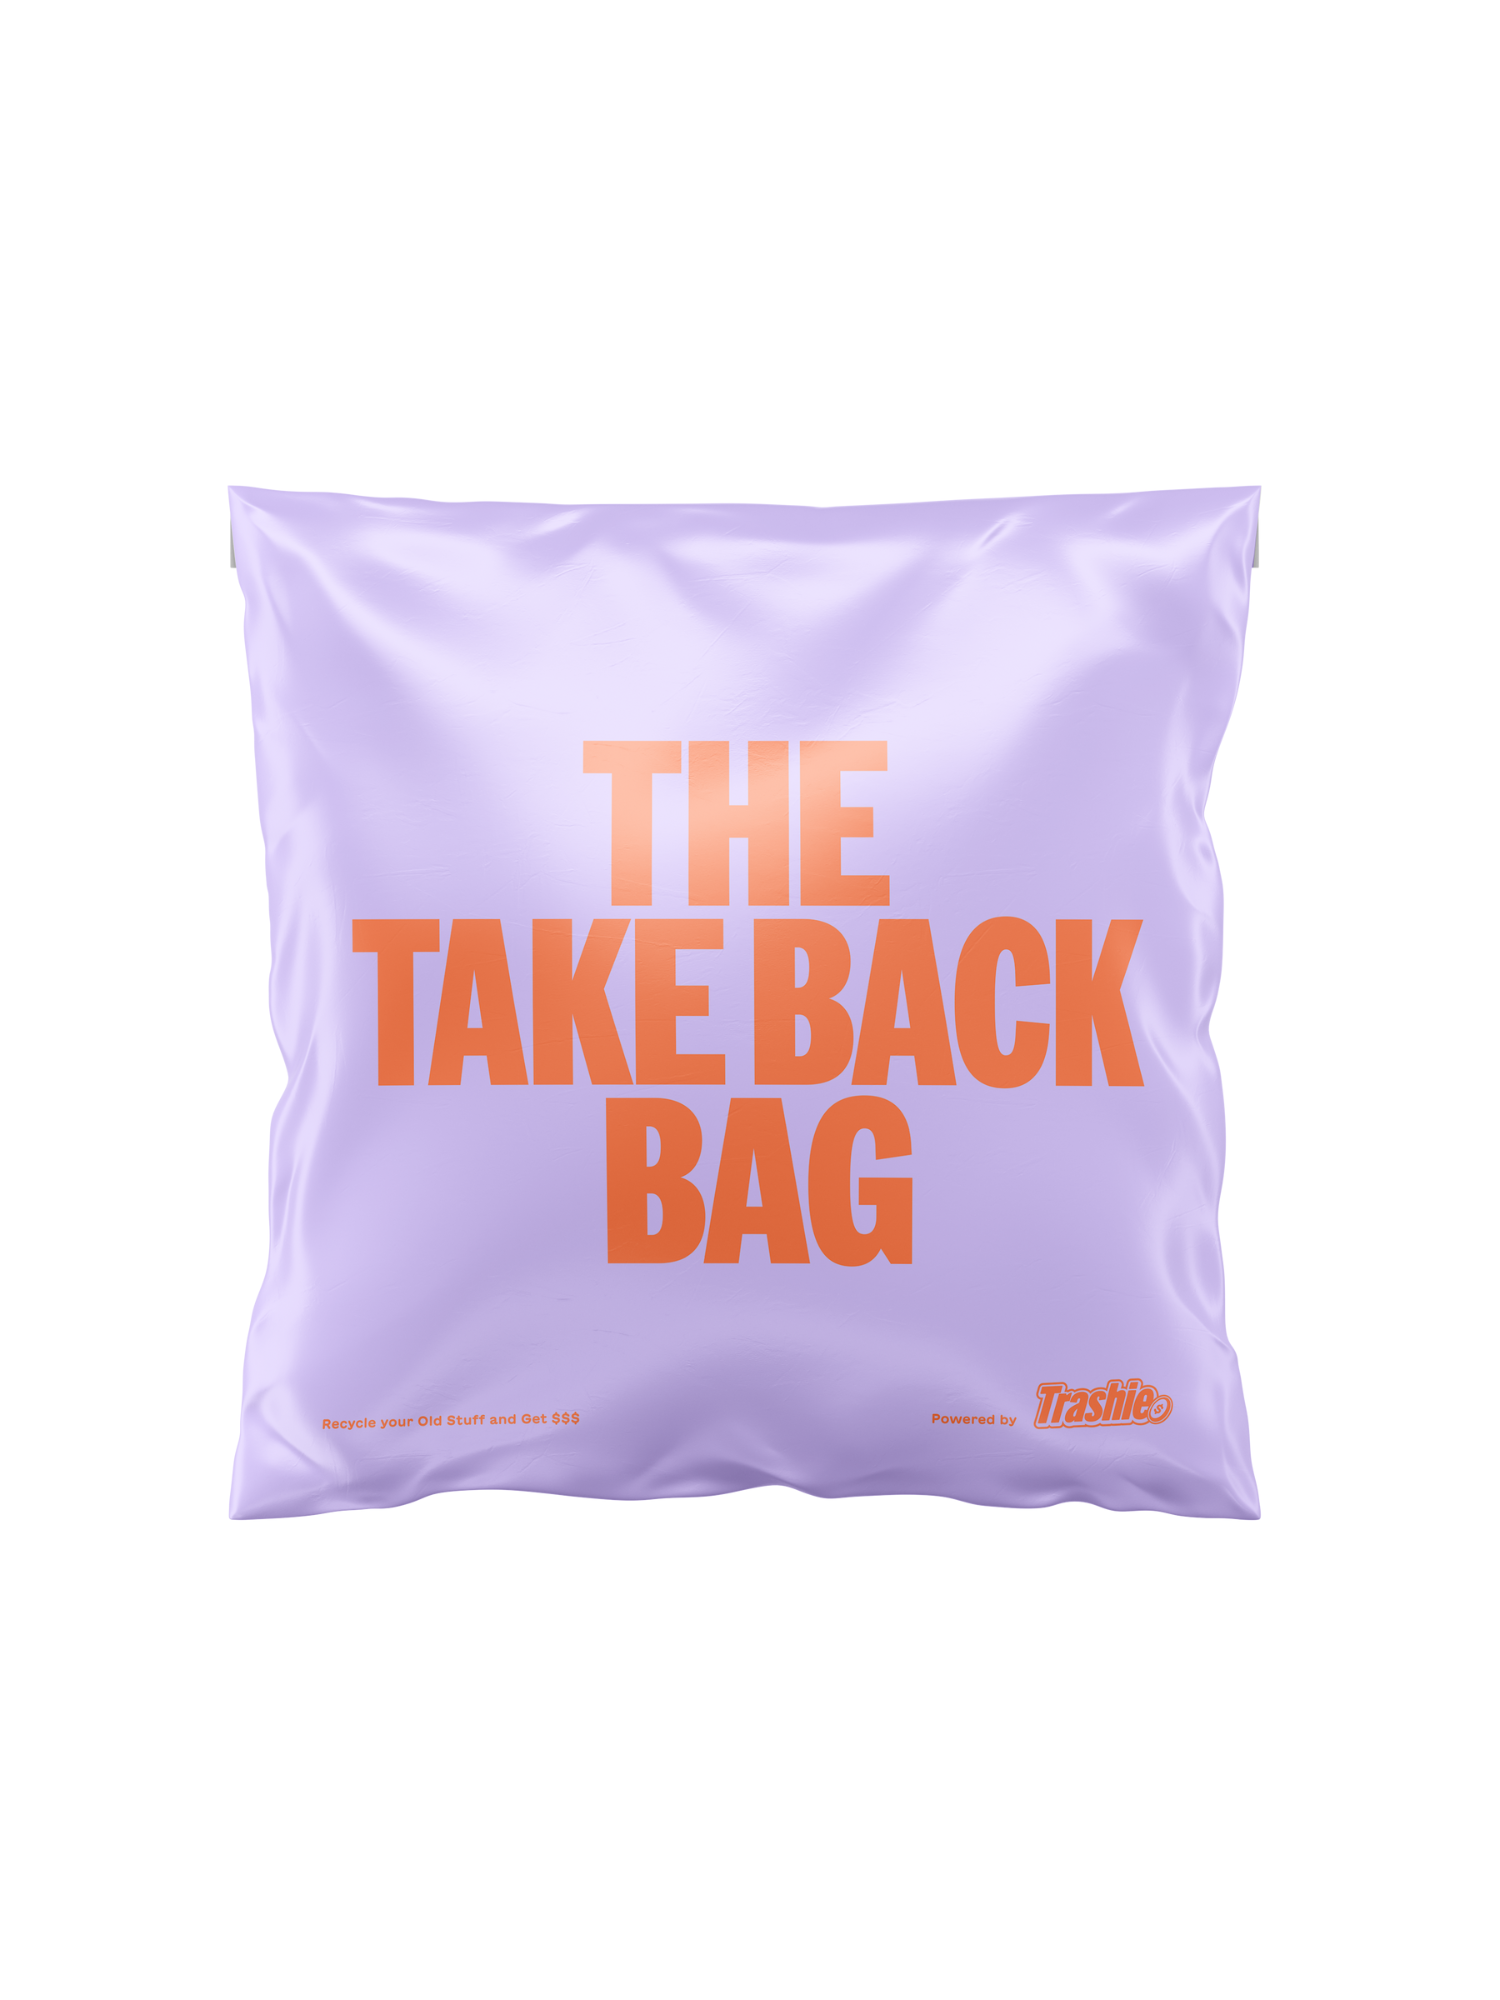 The Take Back Bag - Clothing Recycling